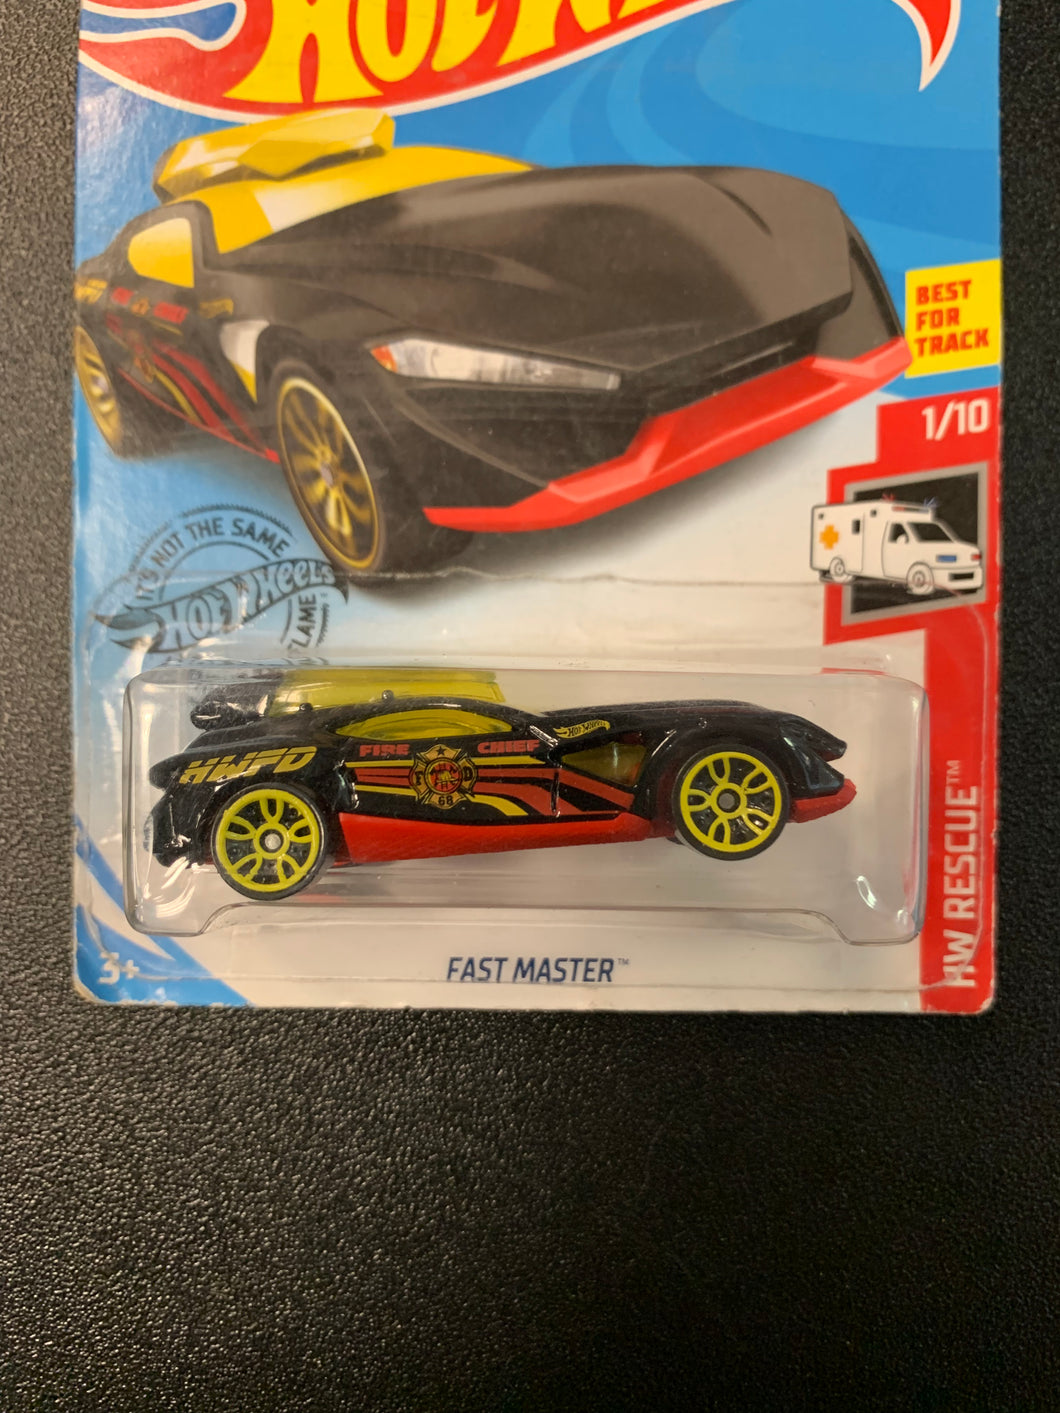 HOT WHEELS RESCUE FAST MASTER 1/10 121/250